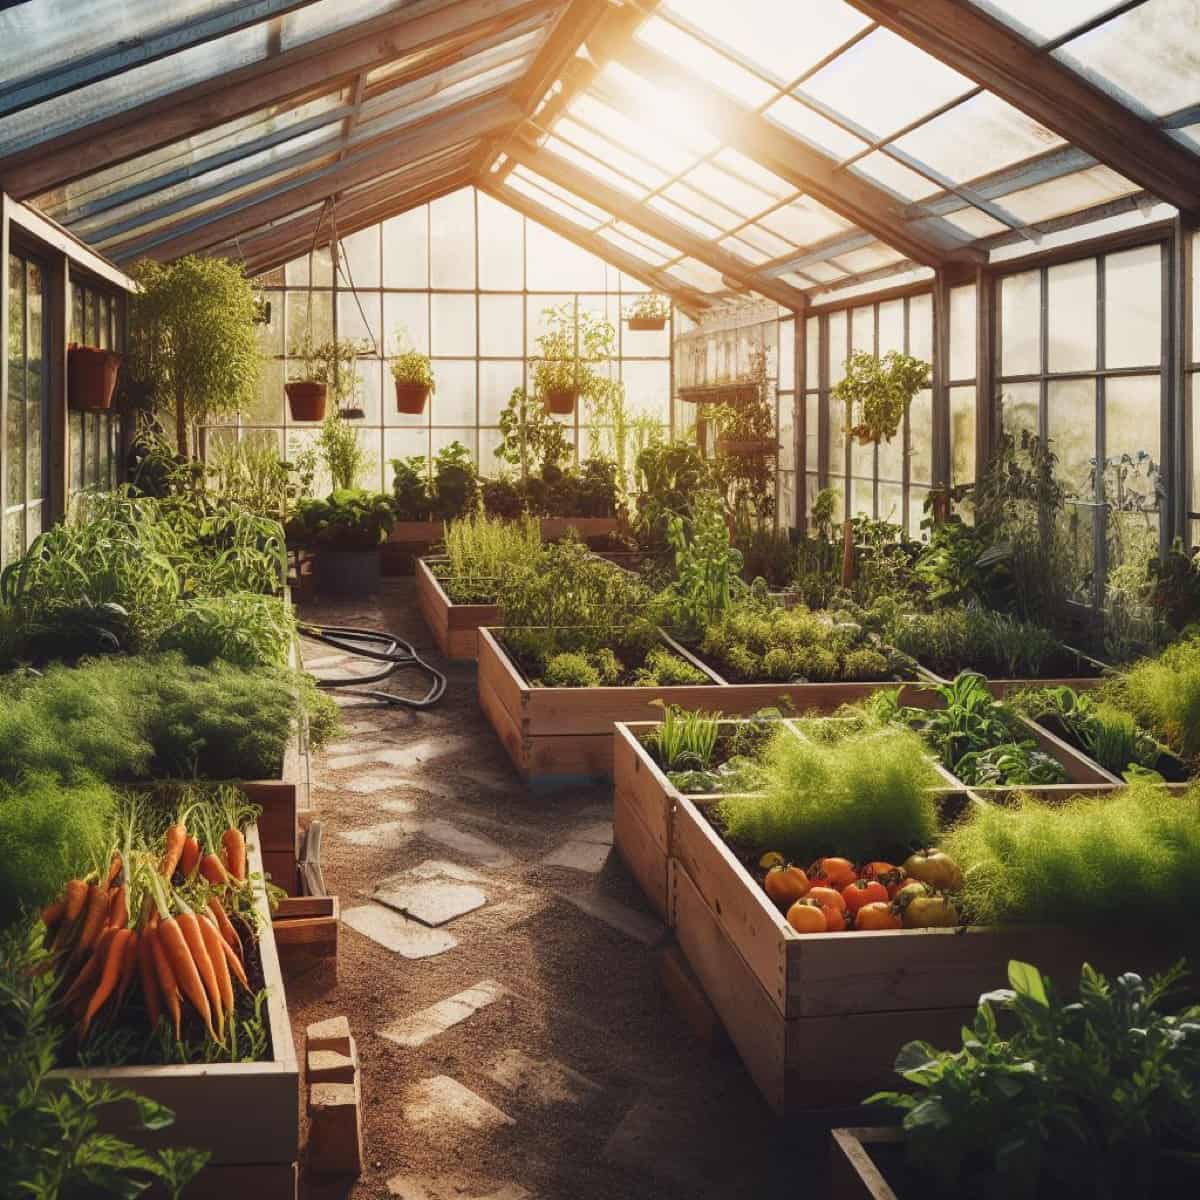 Raised Garden Beds in a Greenhouse